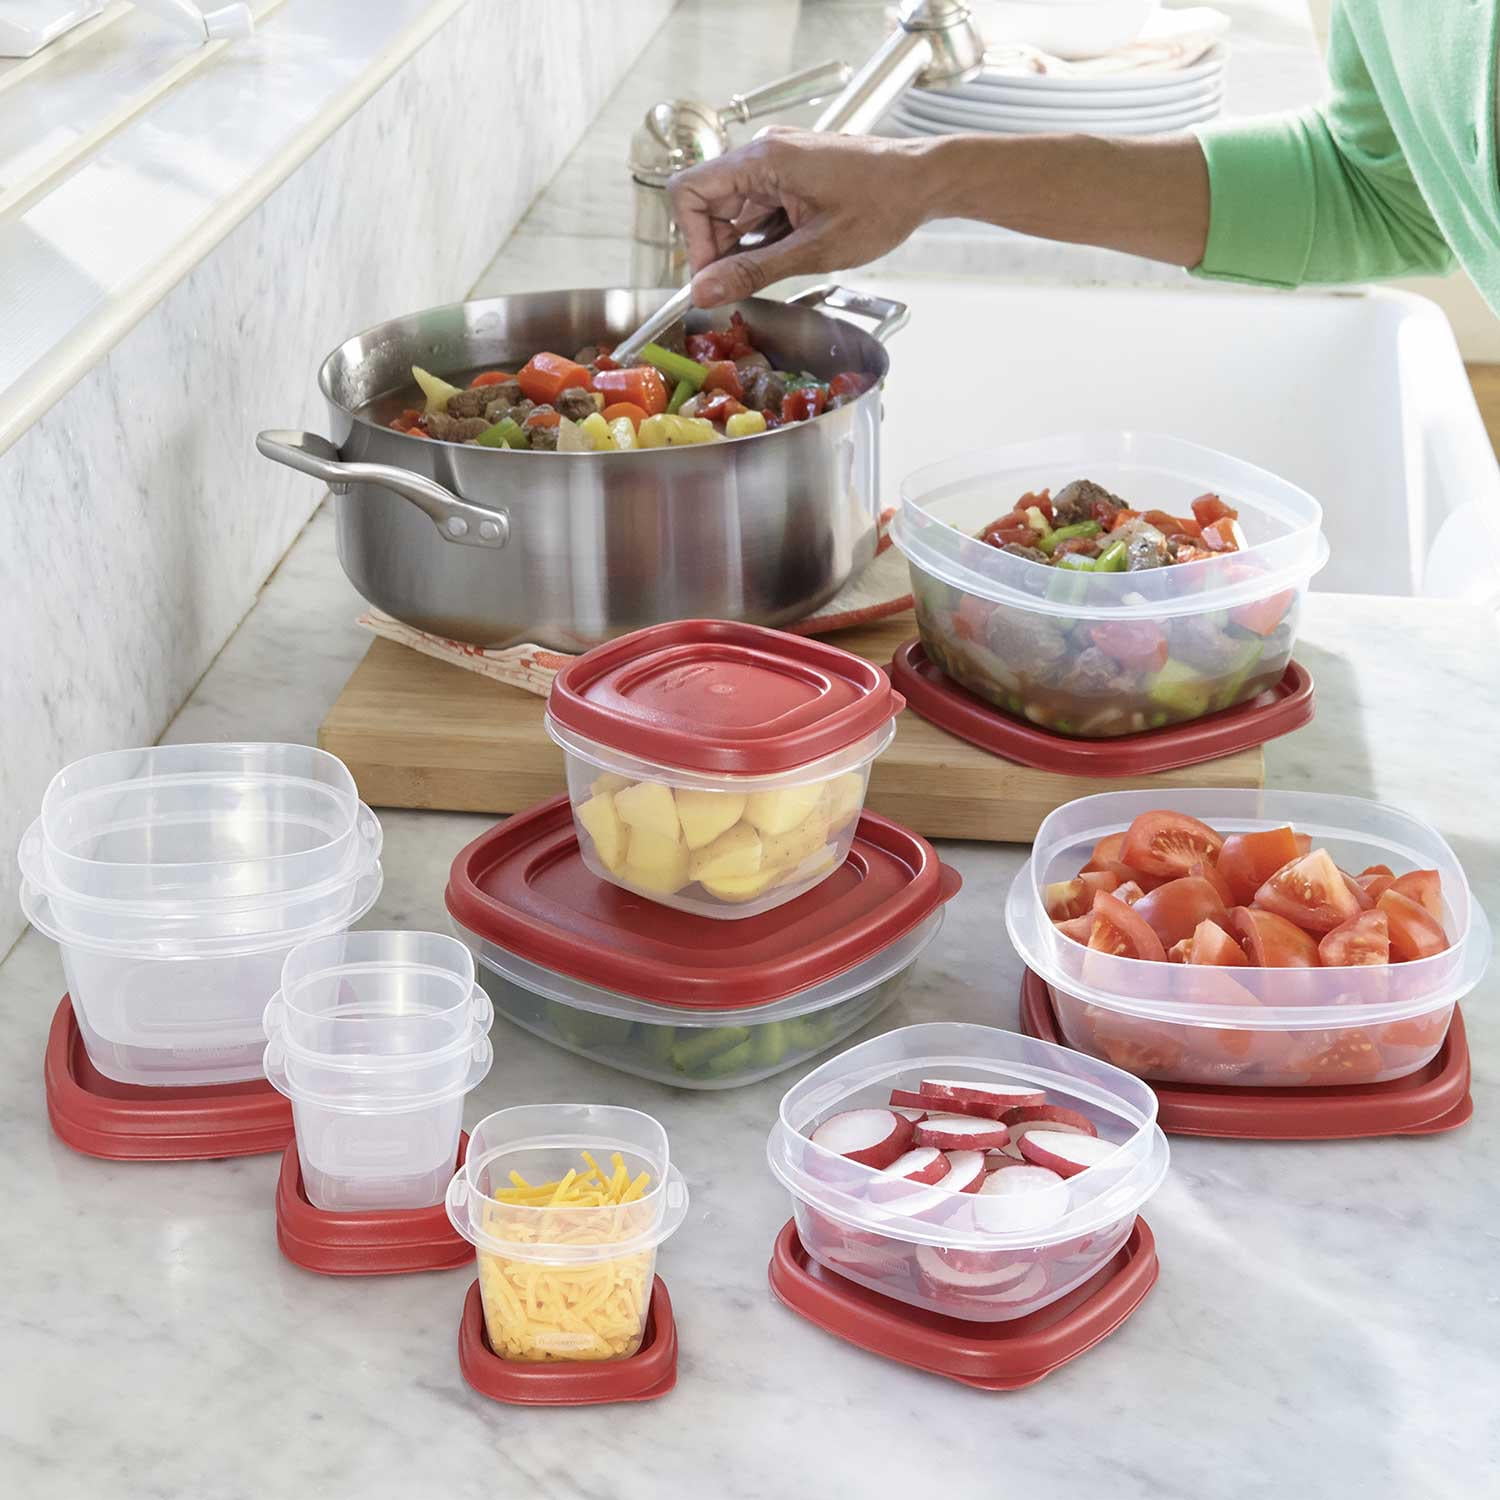 Rubbermaid Easy Find Lids Food Storage Container